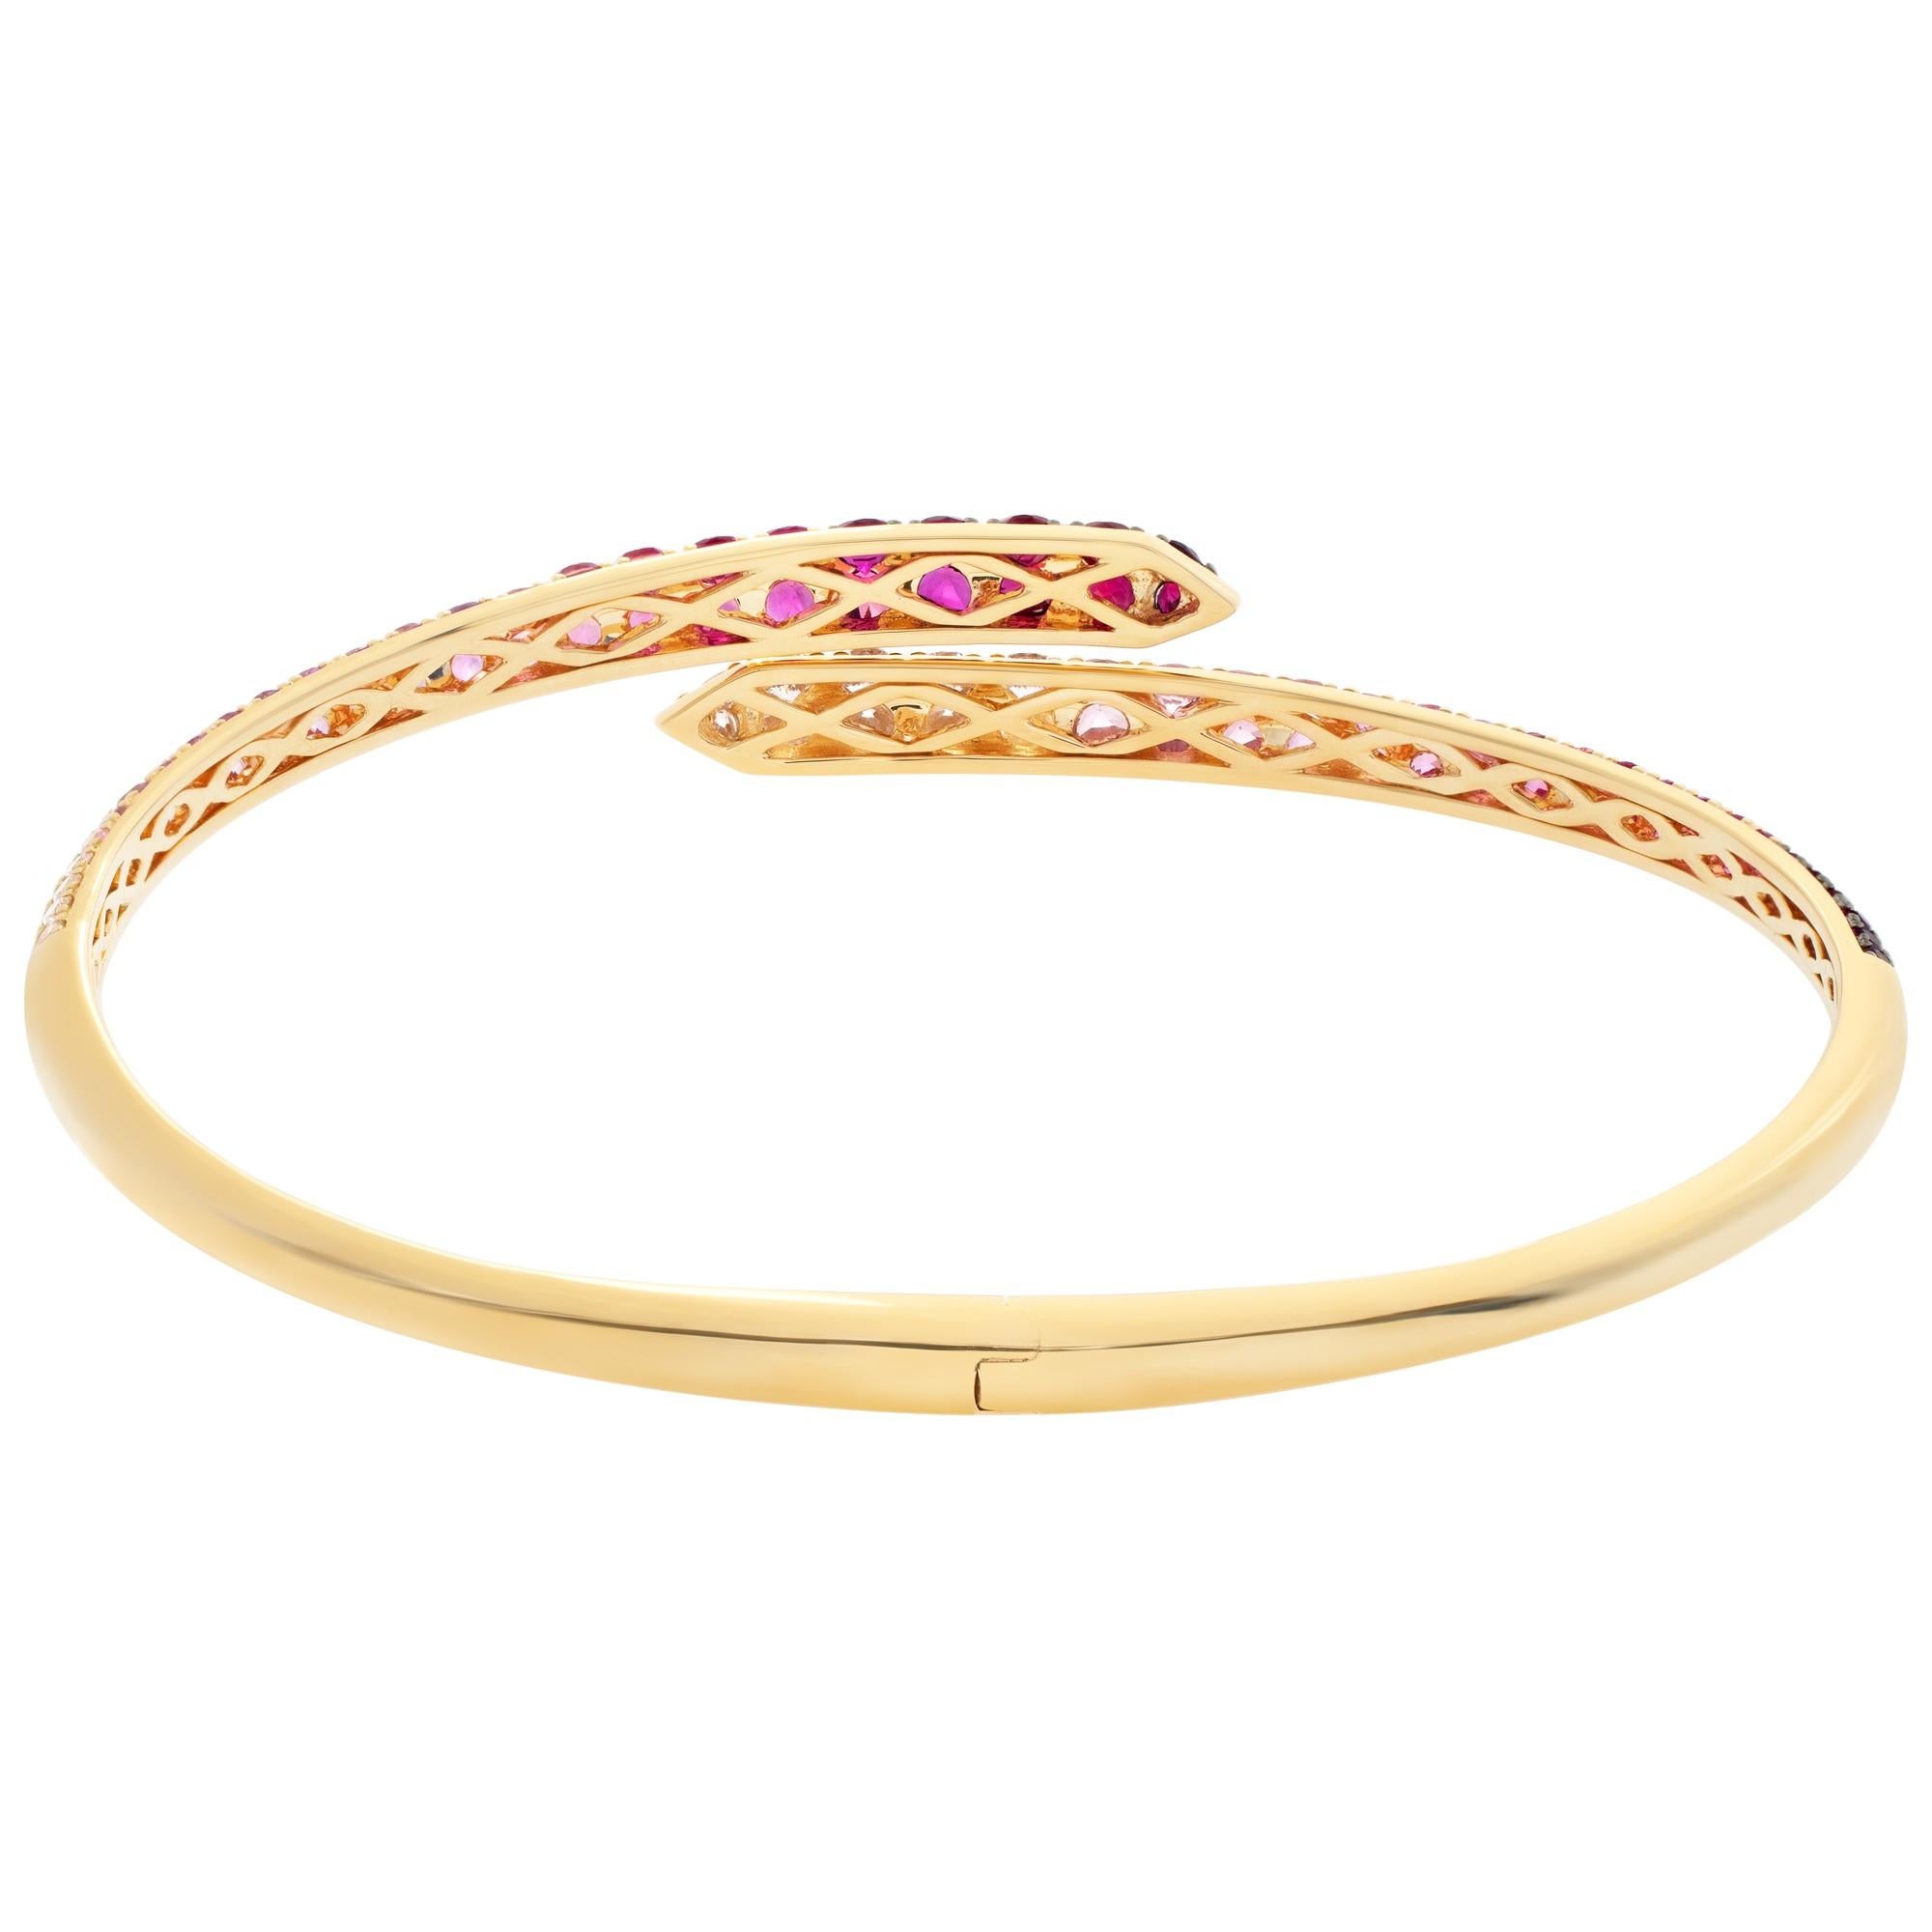 Women's or Men's Gradient Pink Sapphires, Ruby and Diamond Hinged Bangle Set in 18k Yellow Gold